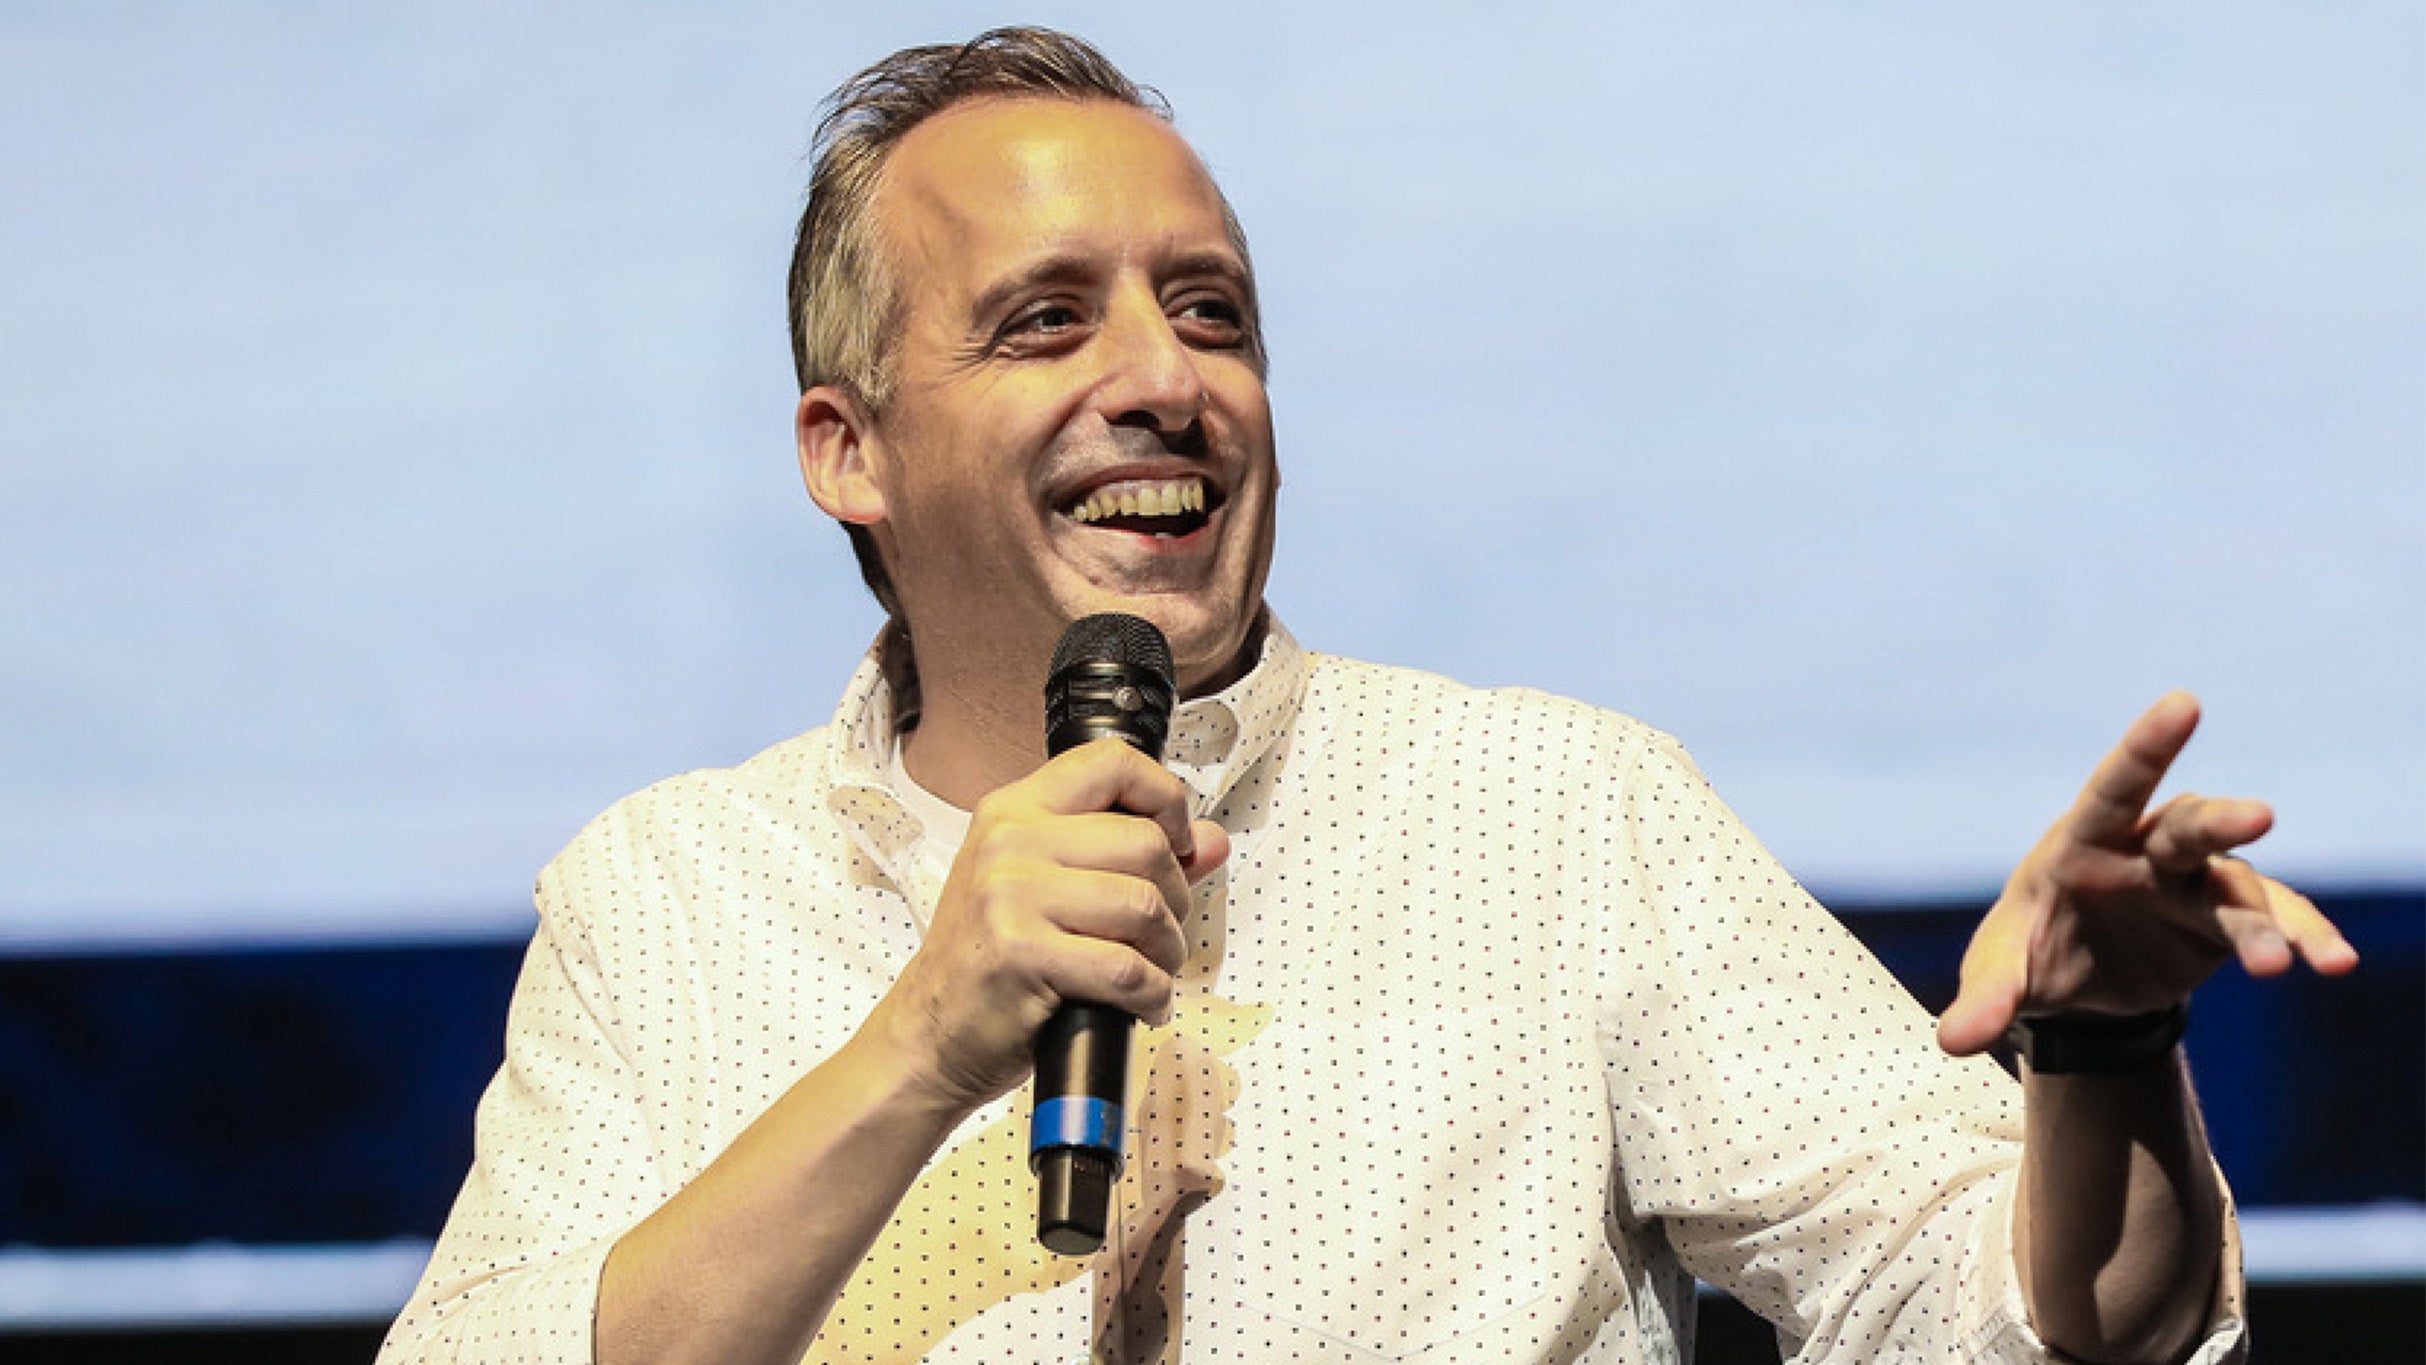 Joe Gatto in New York promo photo for Official Platinum presale offer code